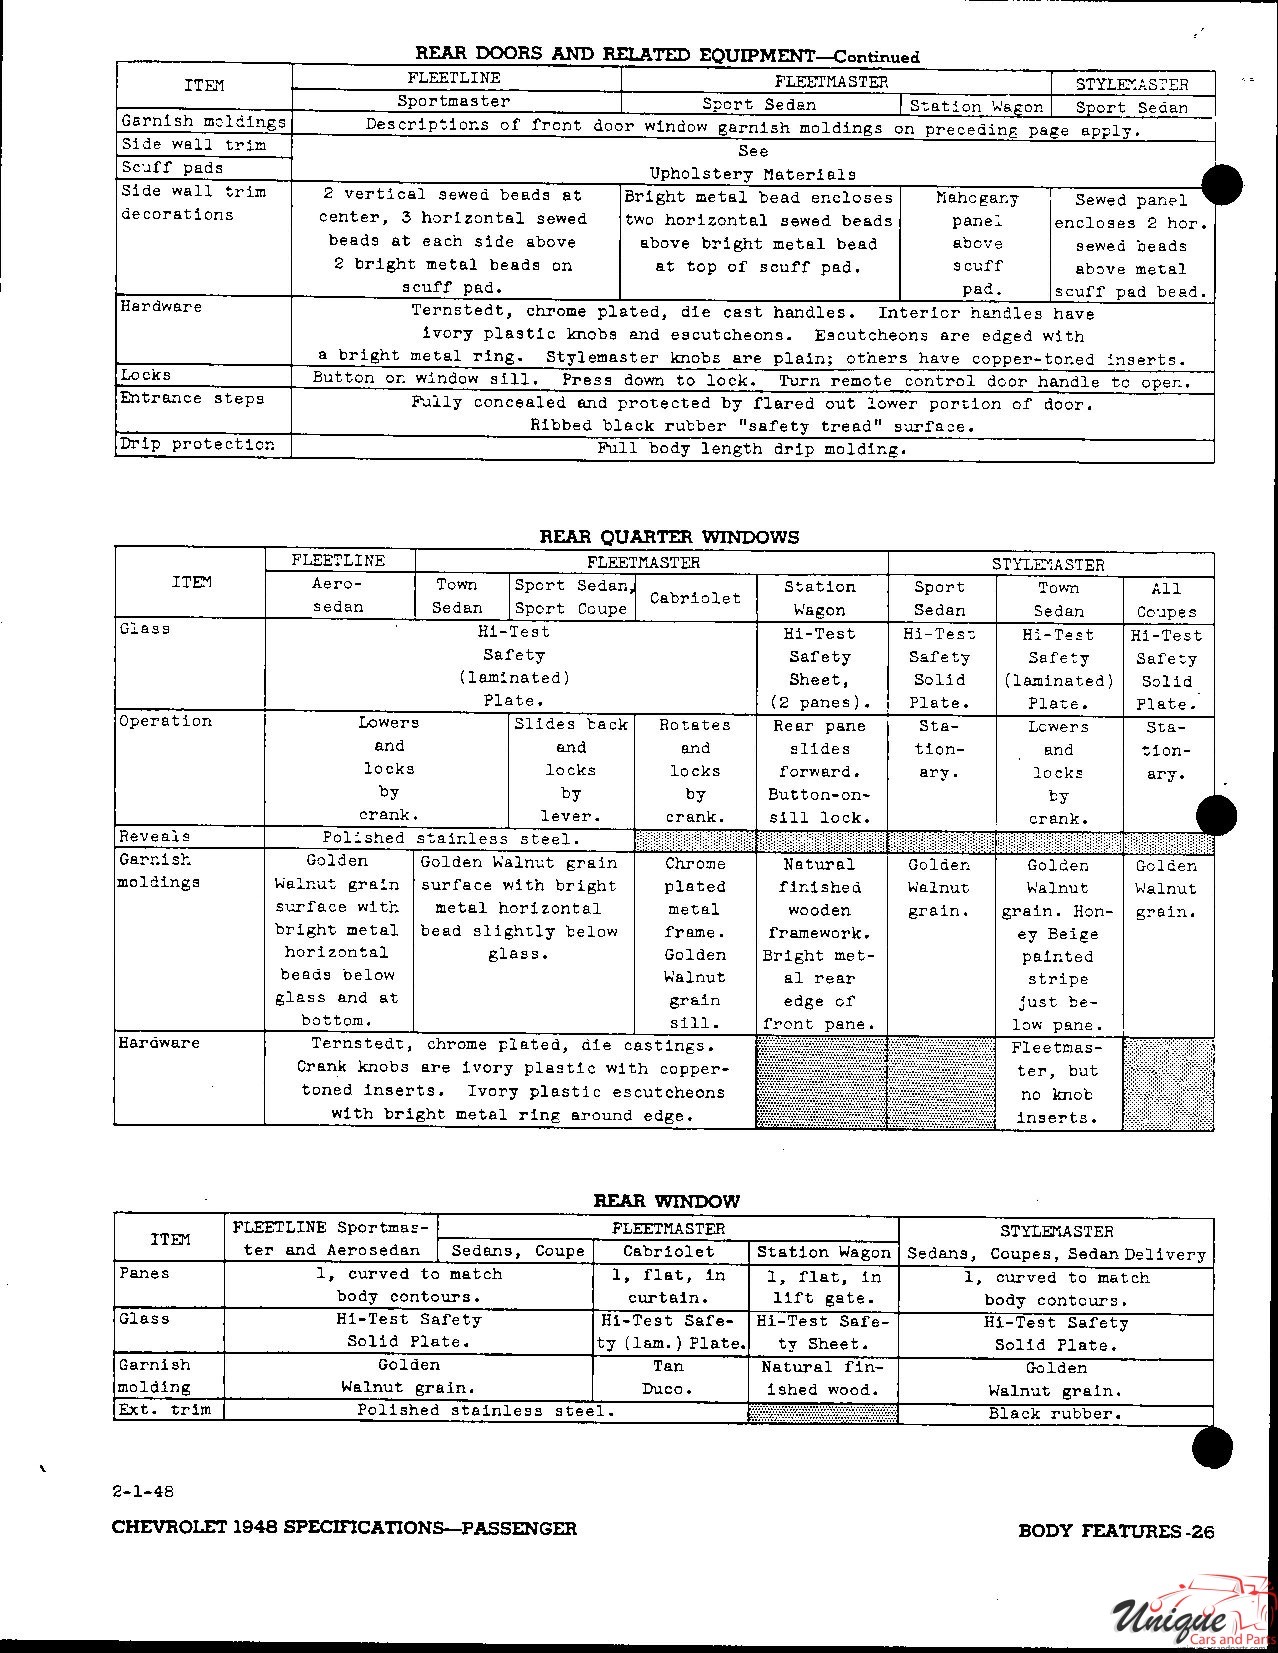 1948 Chevrolet Specifications Page 14